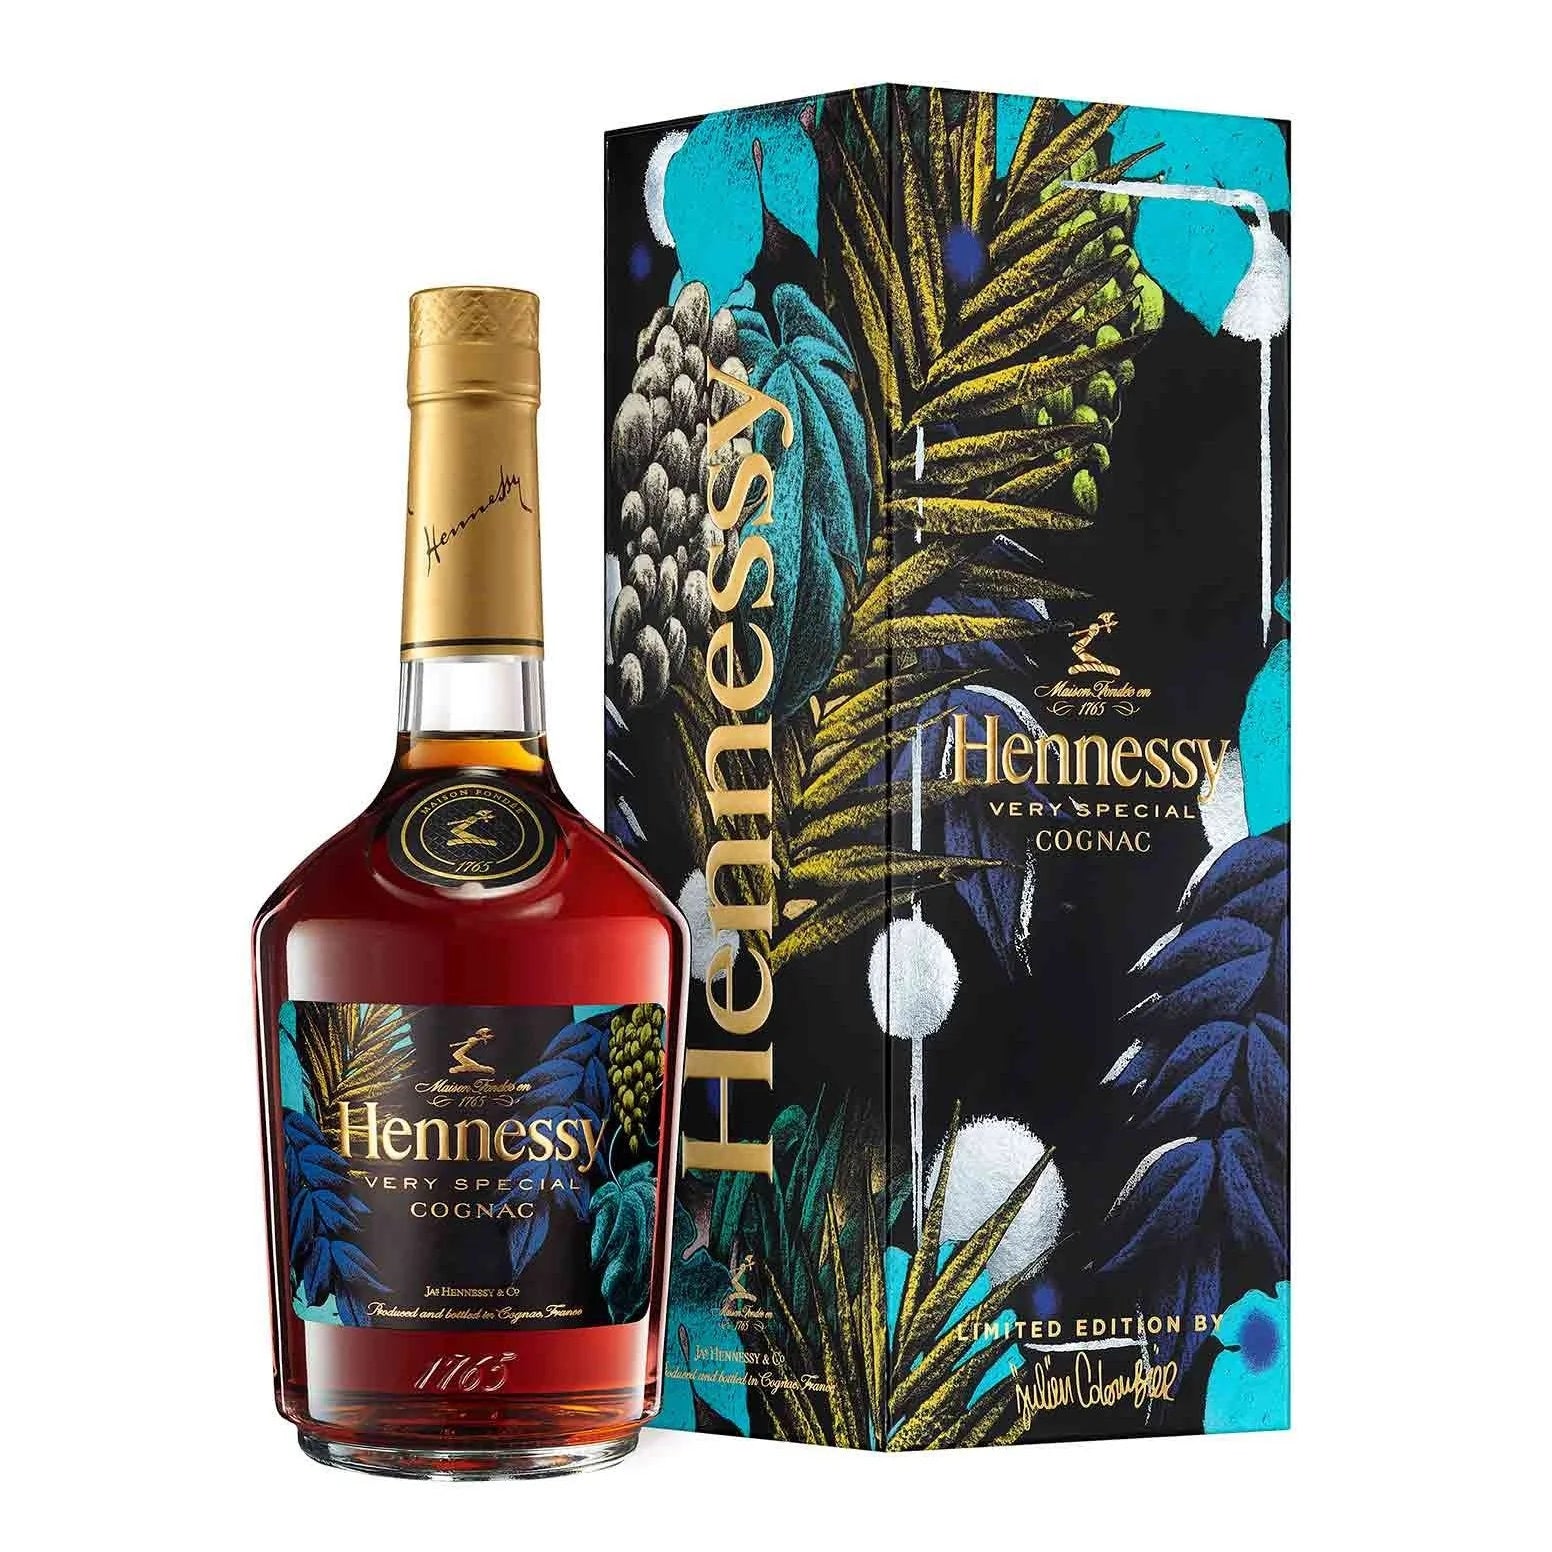 Hennessy VS Cognac Limited Edition By Julien Colombier